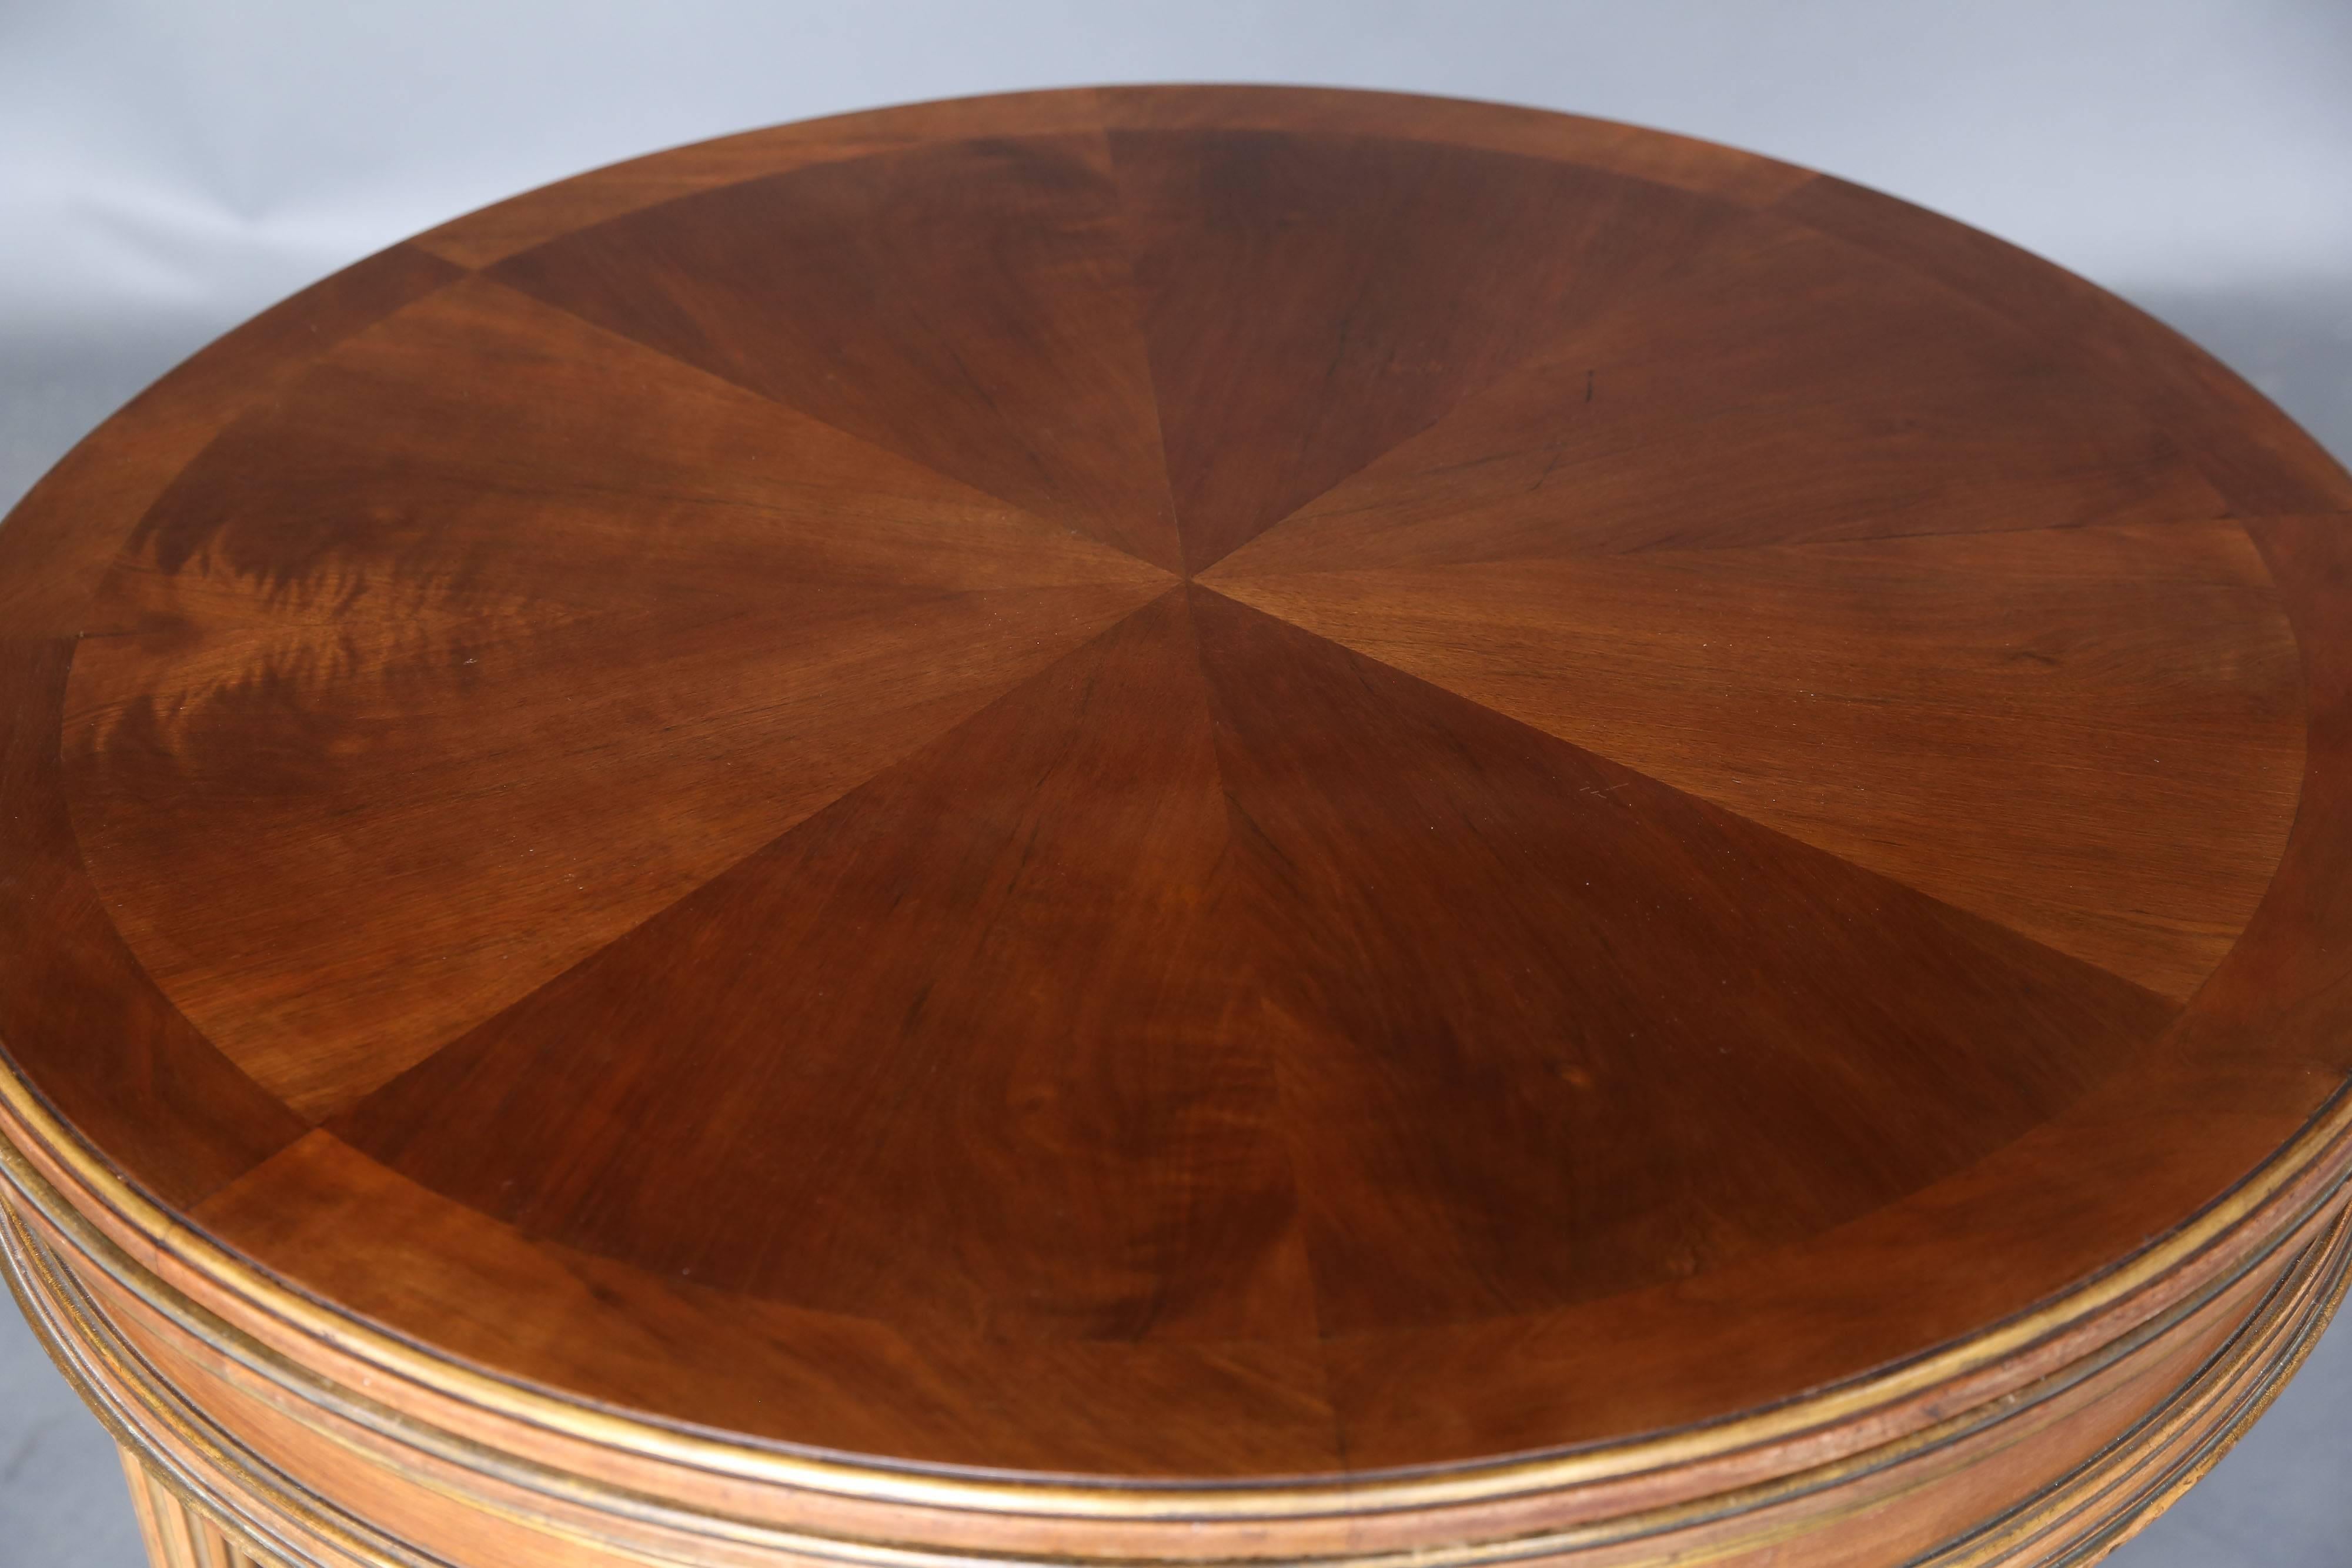 19th century French game table with flip-top that turns it into a centre table or a side table. One side of the top is in radially veneer and the other side is in leather. Table in parcel-gilt and walnut, circa 1890. Floor to skirt of table: 24.75